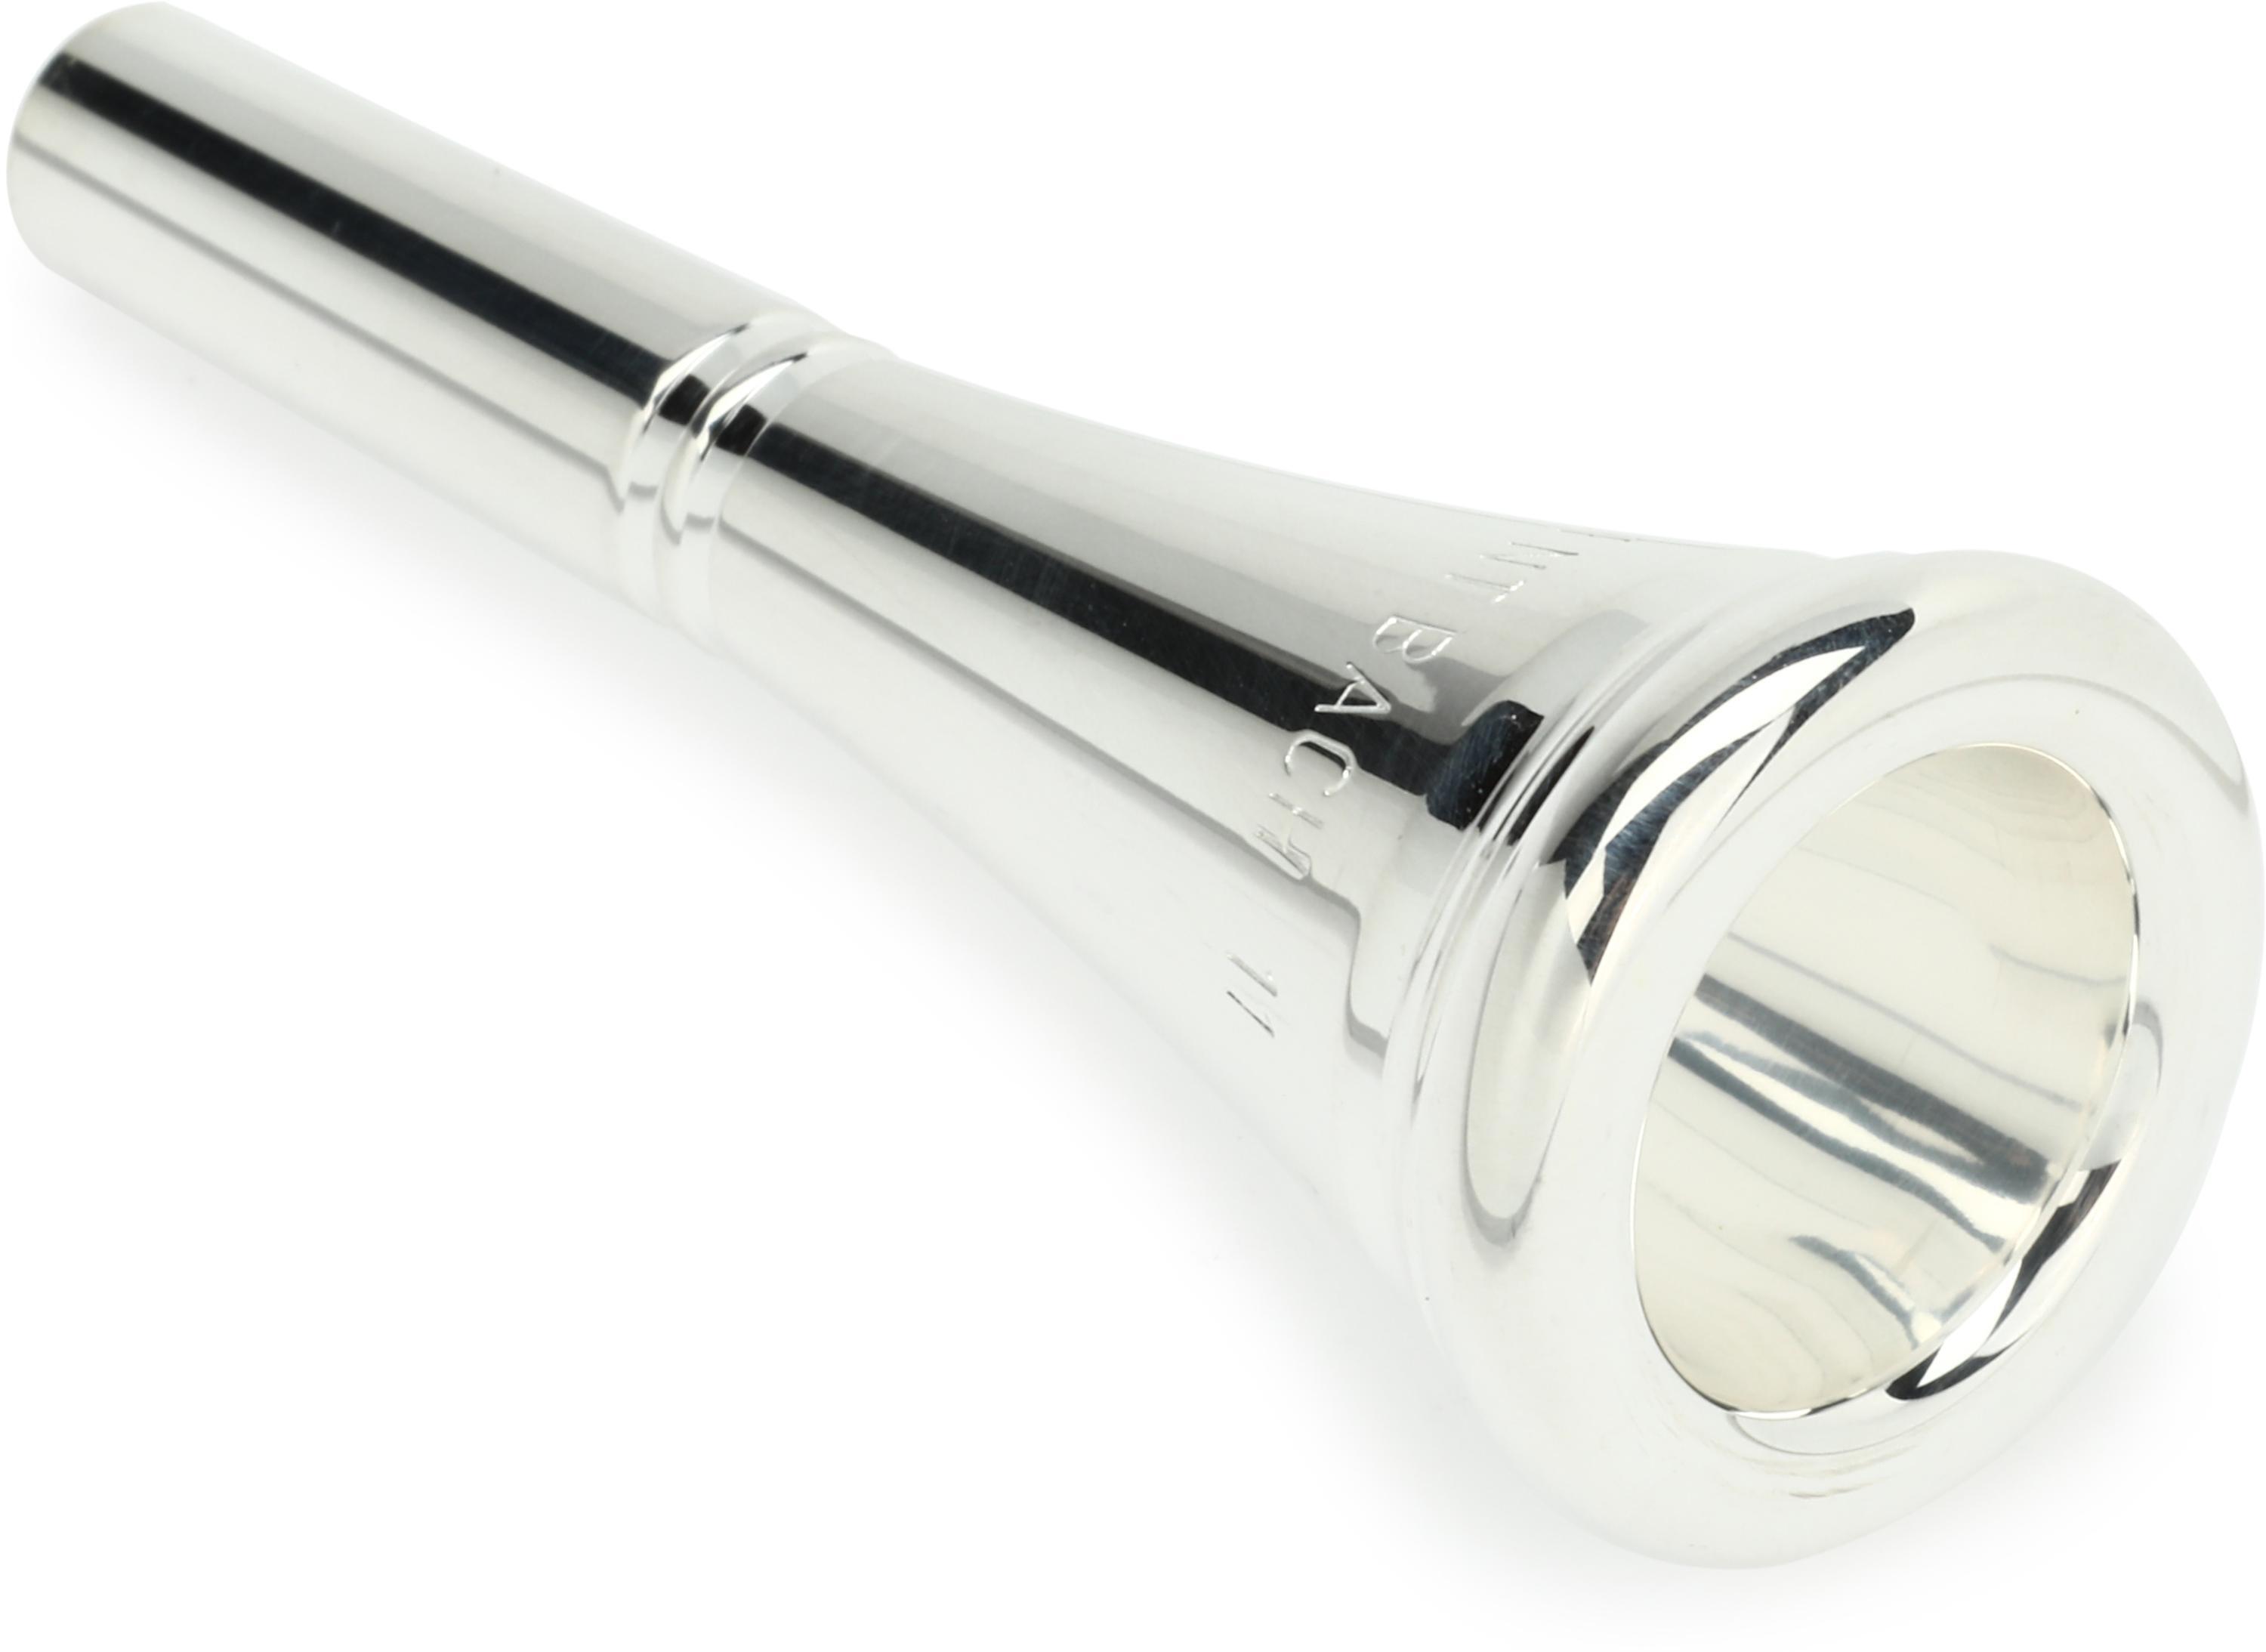 Bach 336 Classic Series Silver-plated French Horn Mouthpiece - 11 |  Sweetwater